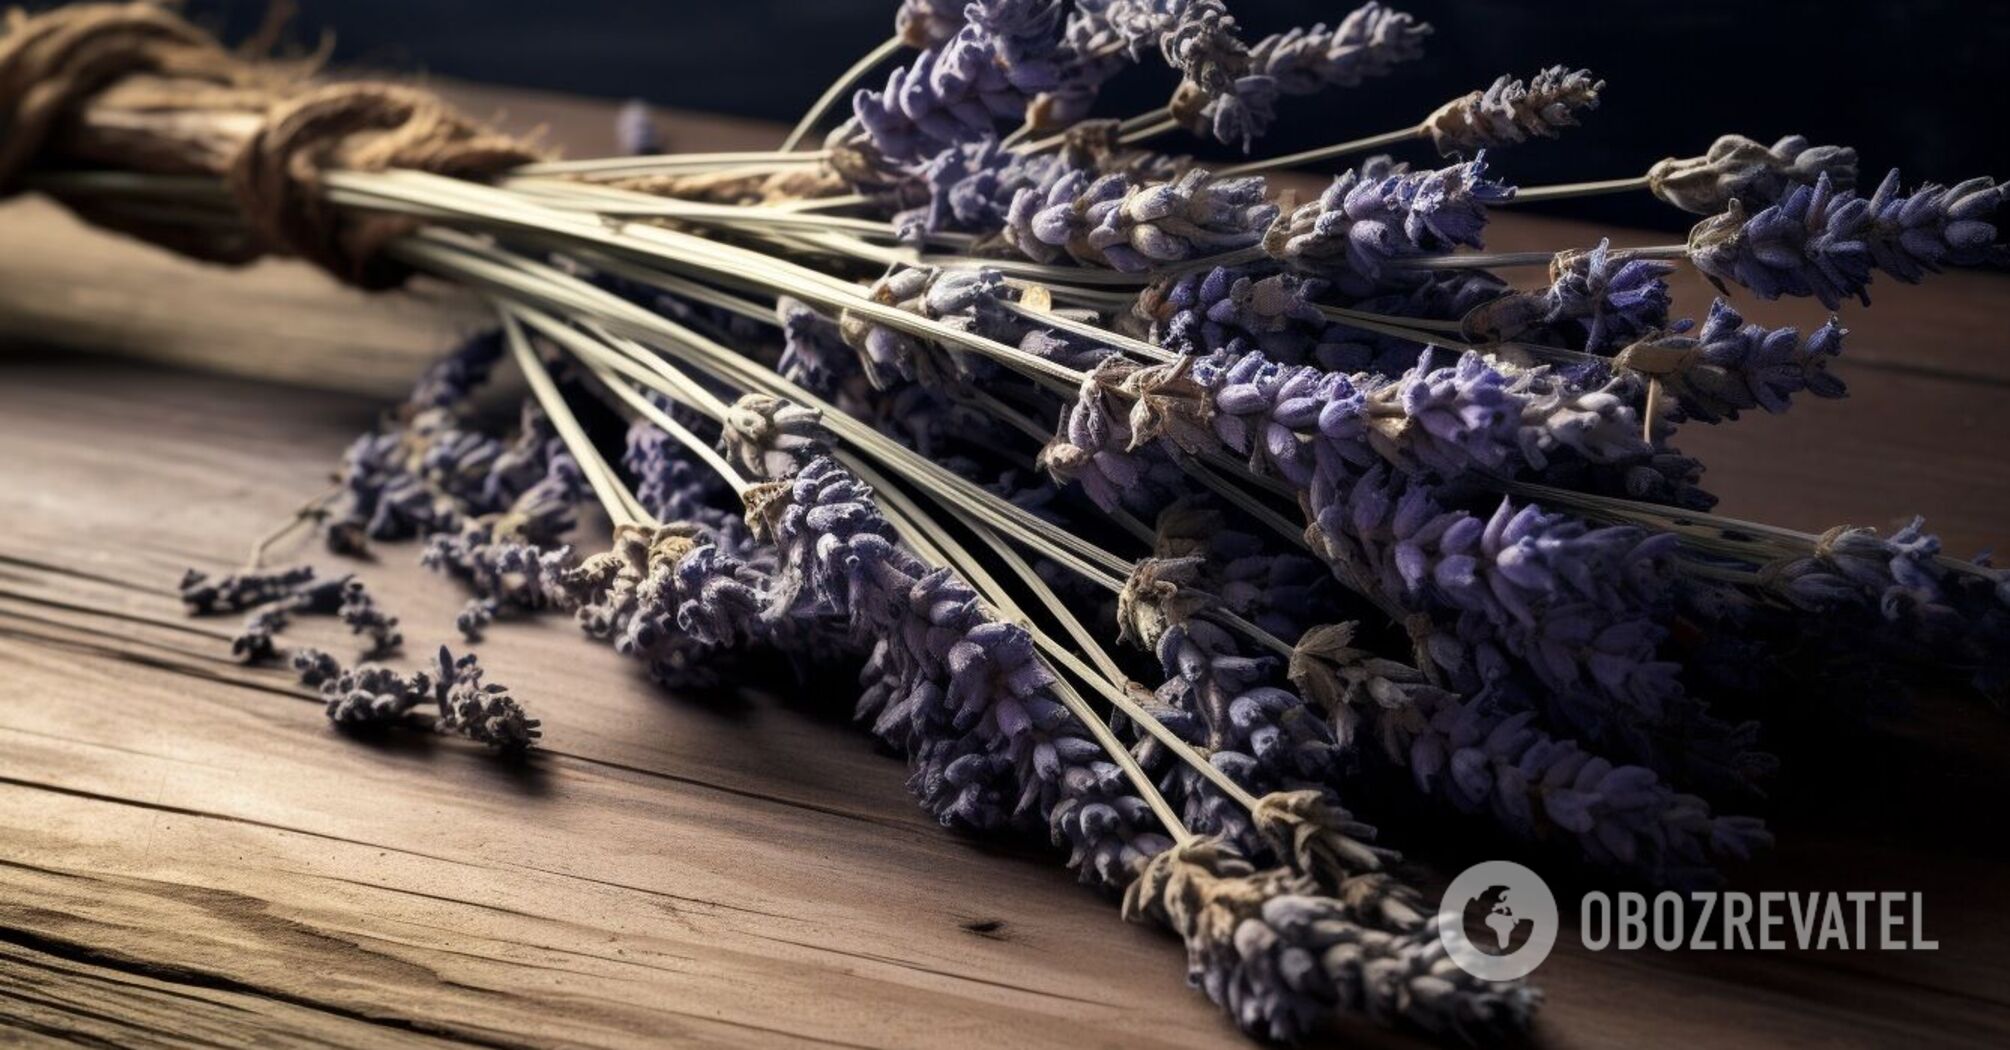 How to Dry Lavender and Keep It Smelling Lovely